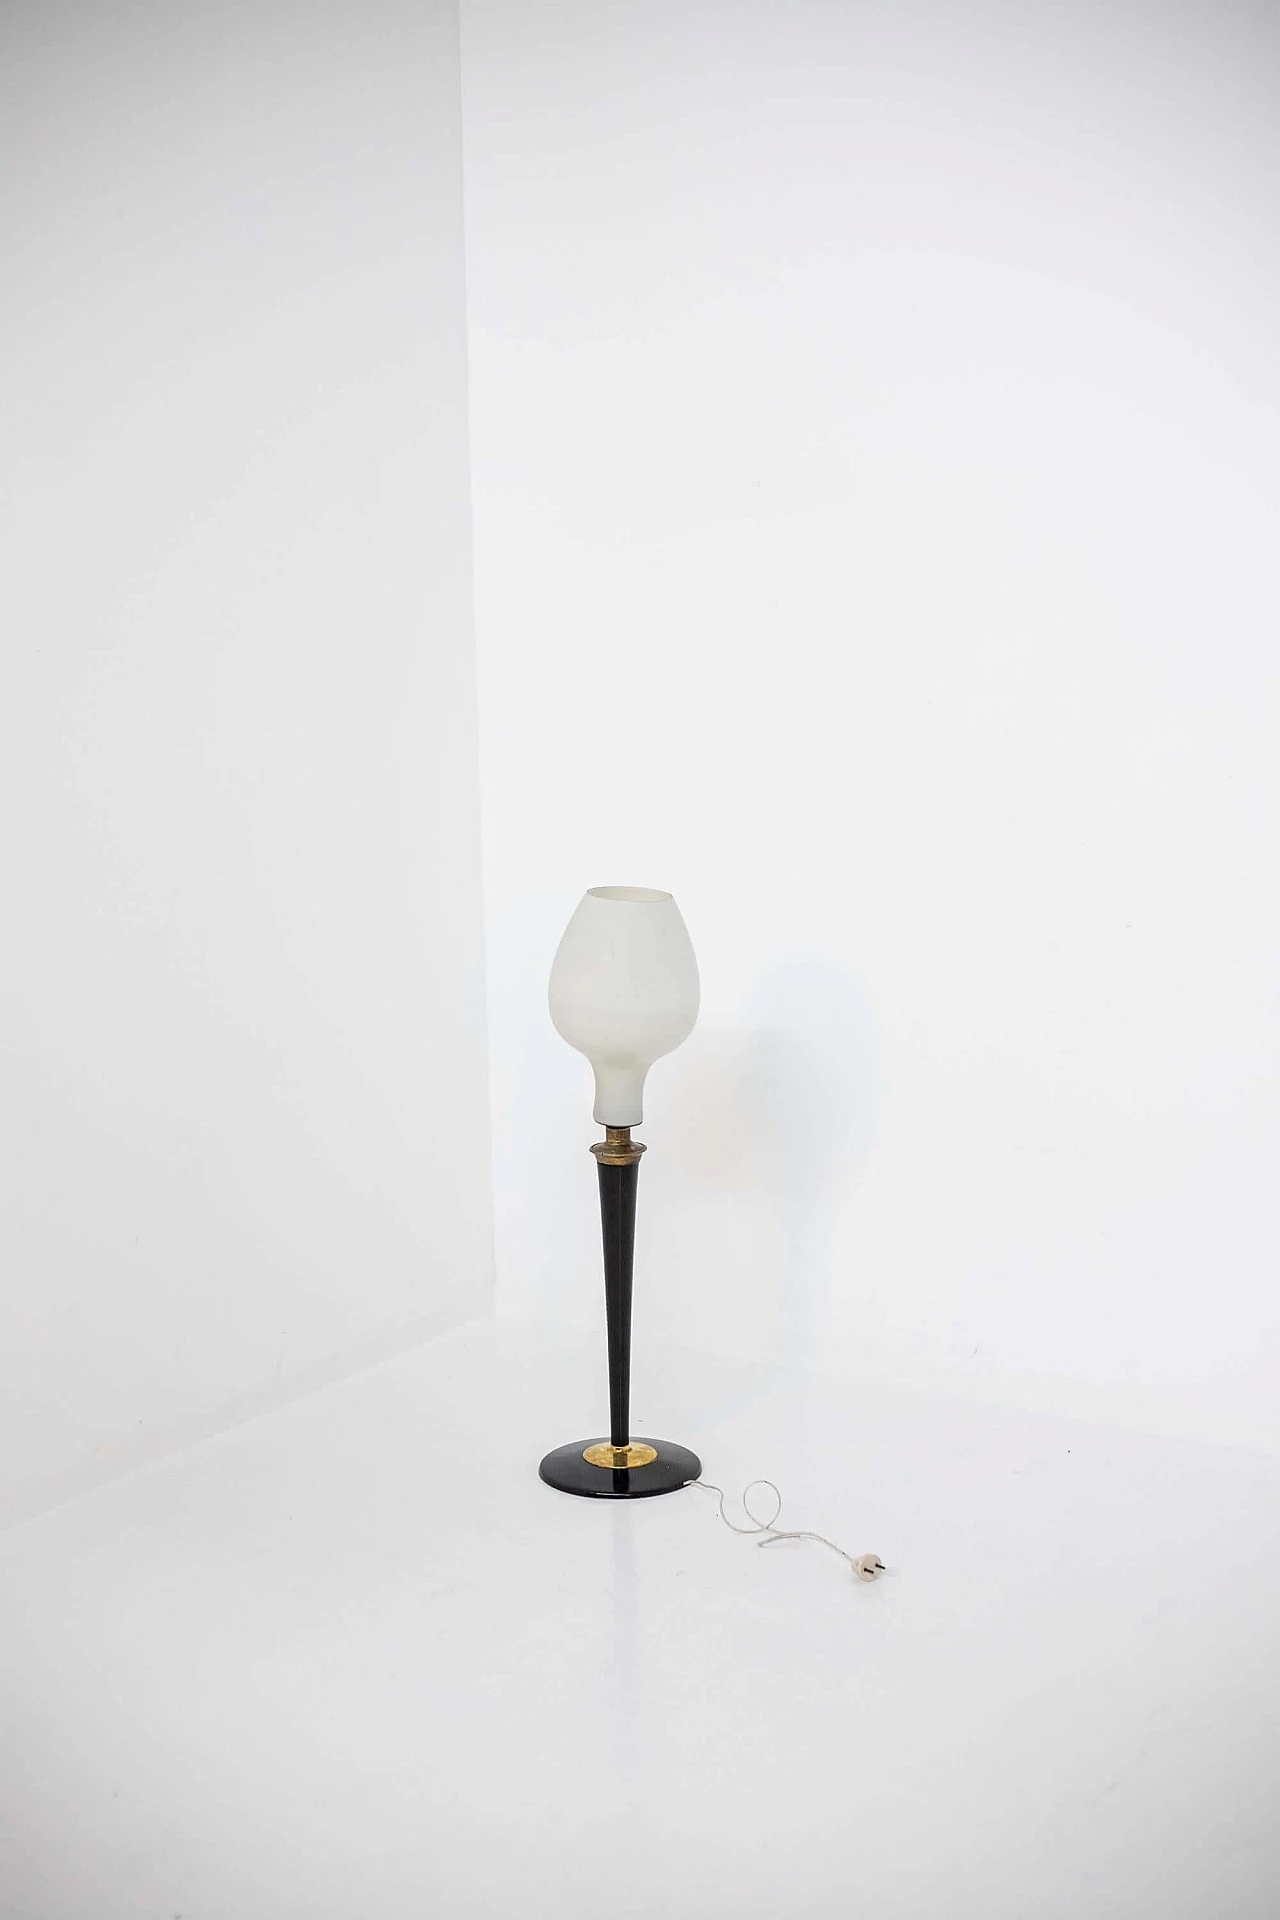 Opal glass table lamp with wood and brass frame, 1950s 1400580